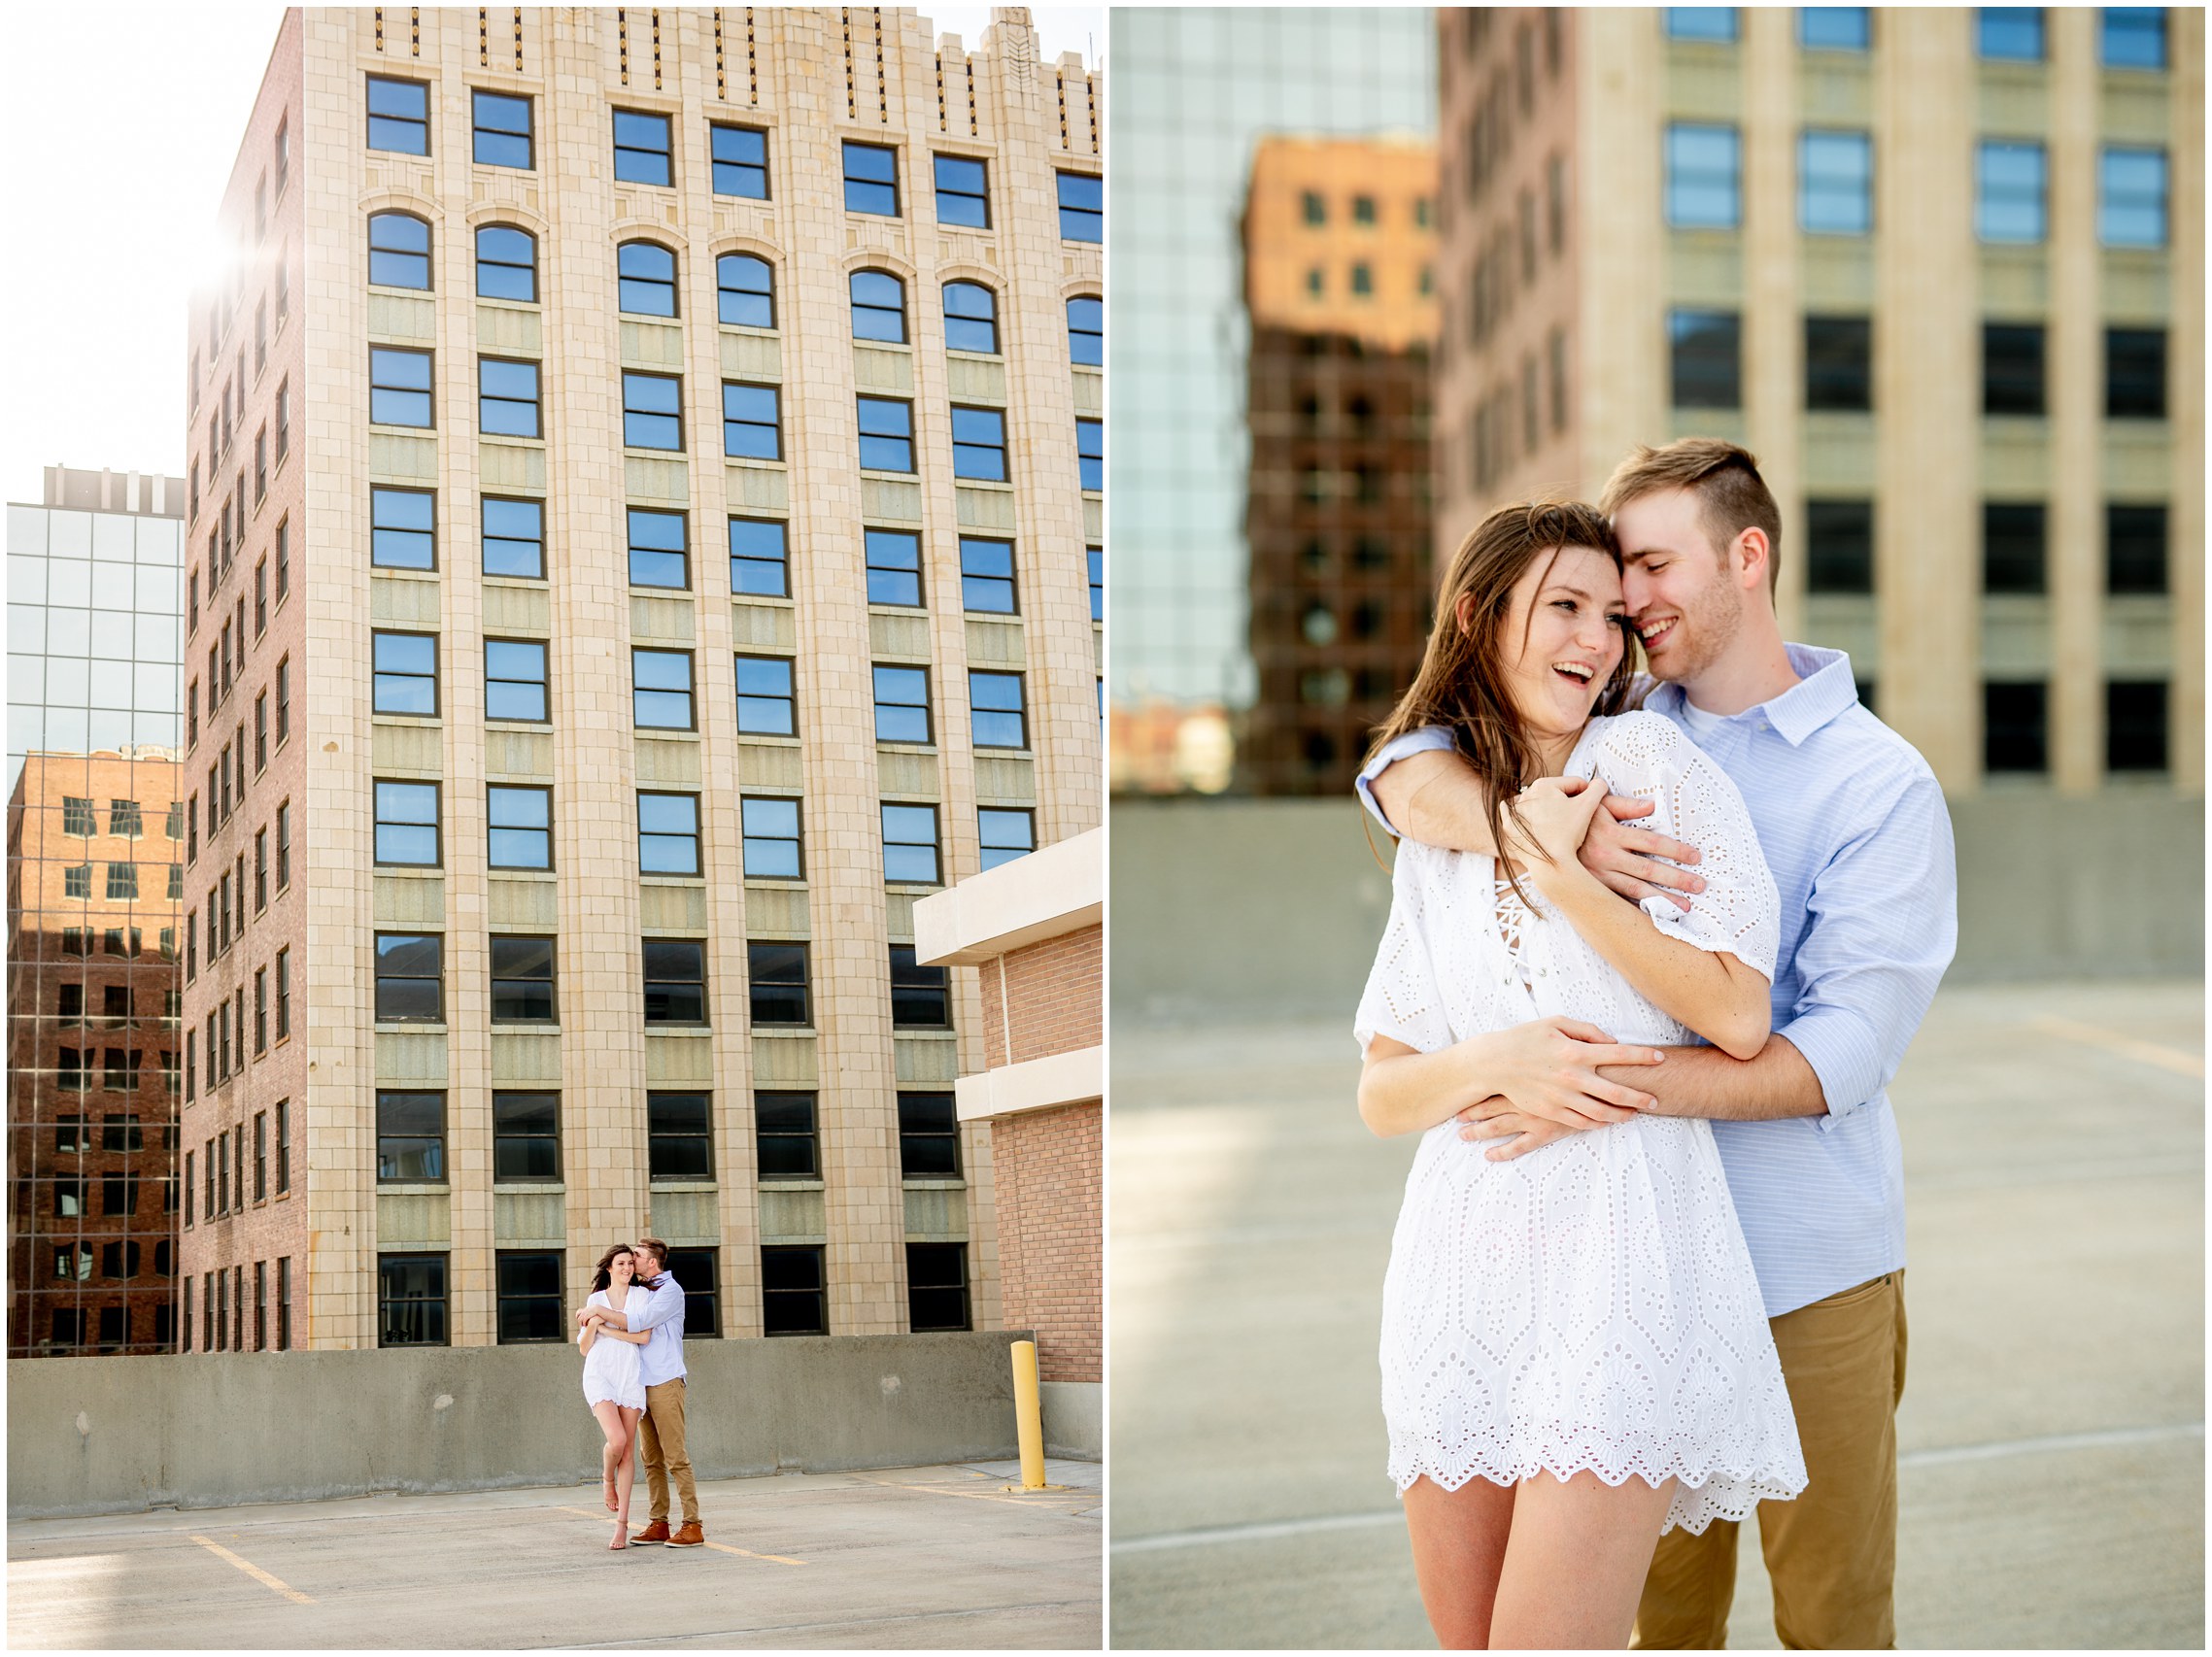 Downtown-Sioux-City-Engagement-Session-36.jpg